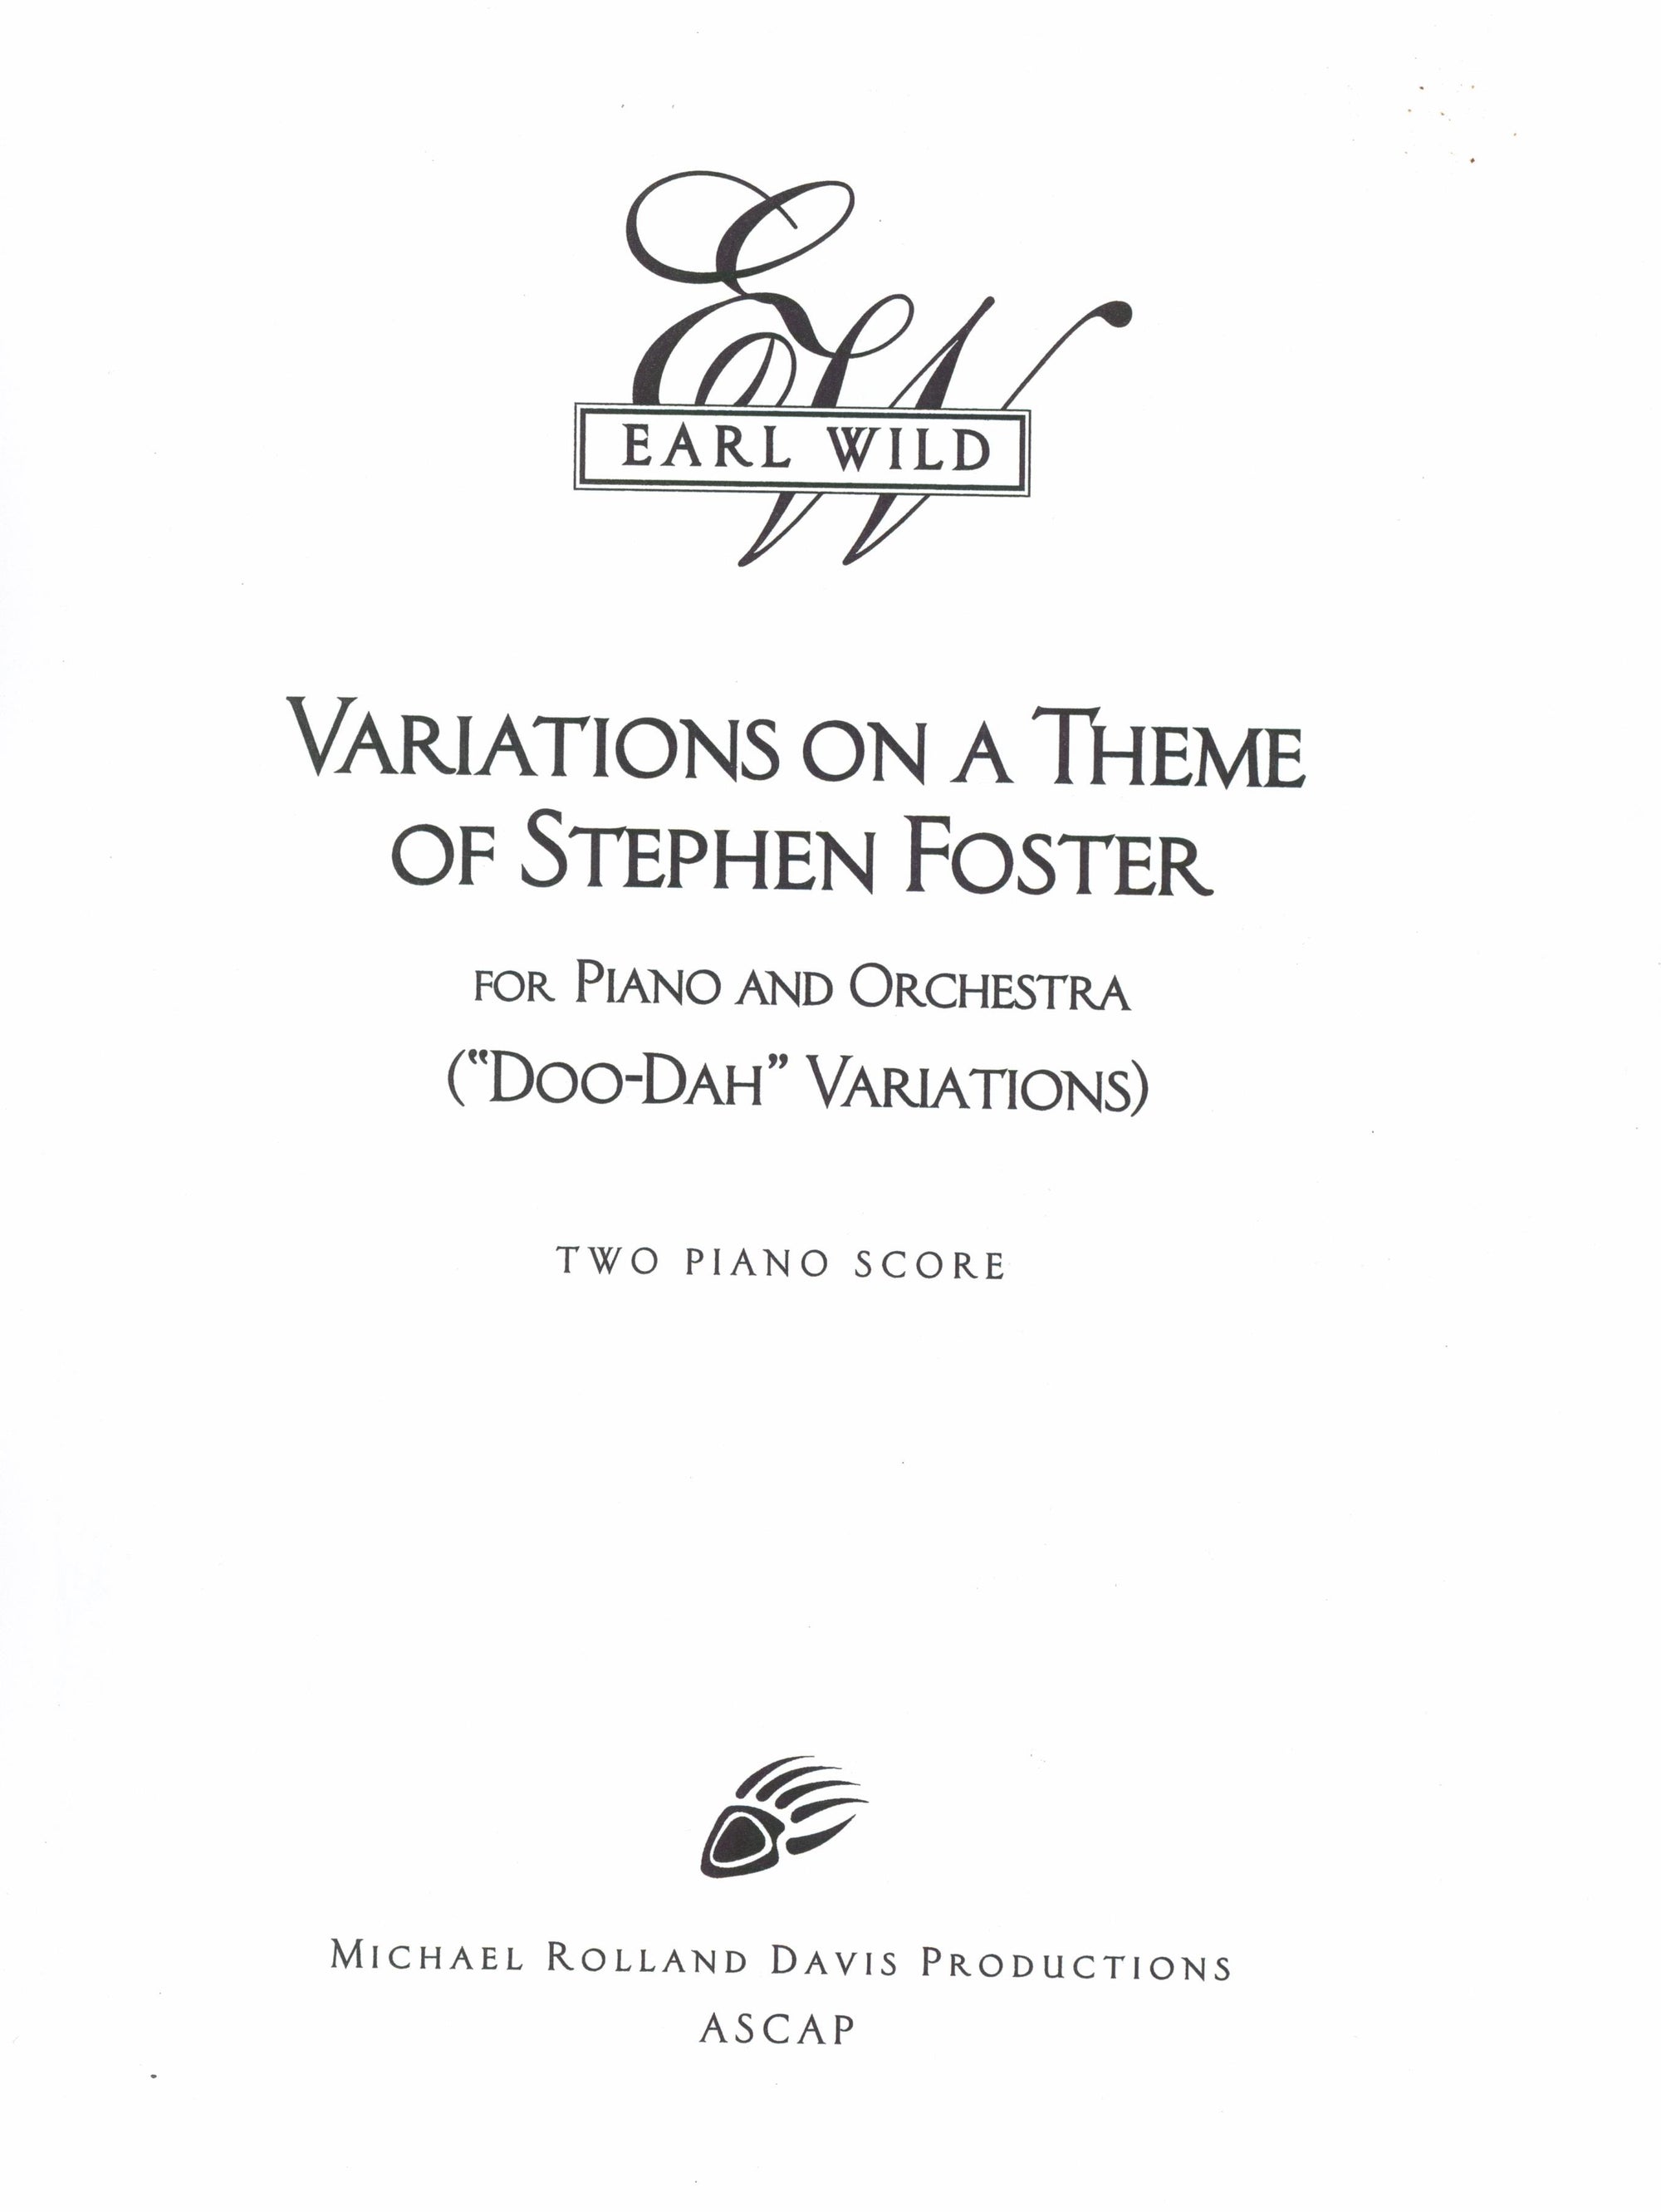 Wild: Variations on a Theme of Stephen Foster